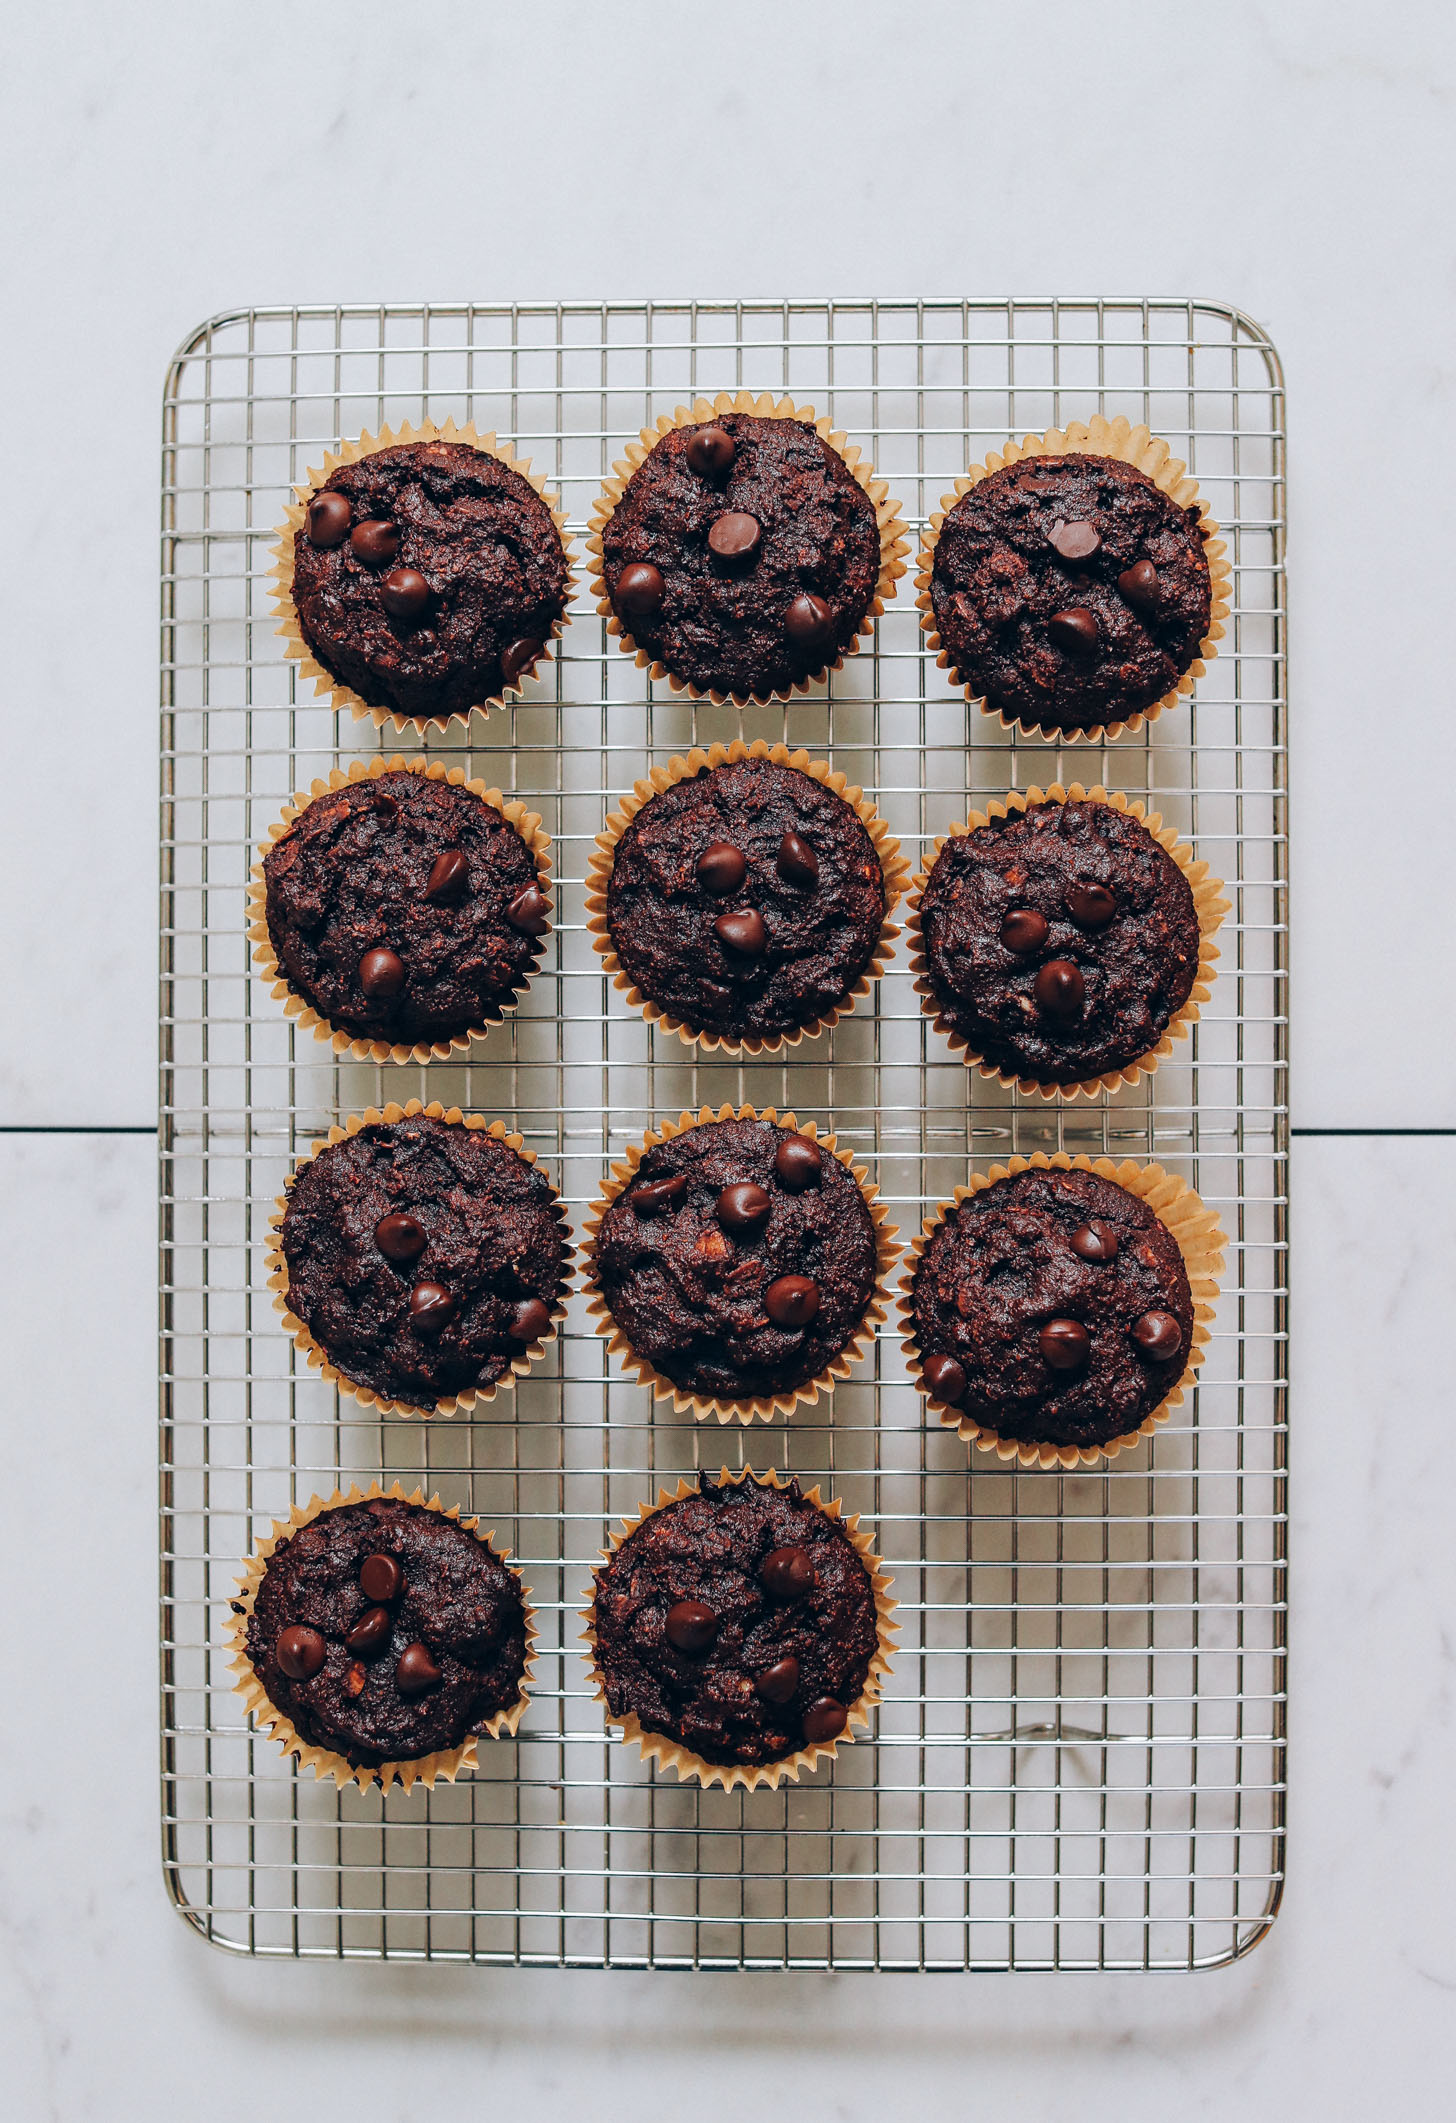 Cooling rack with a batch of our Fudgy Banana Chocolate Muffins recipe